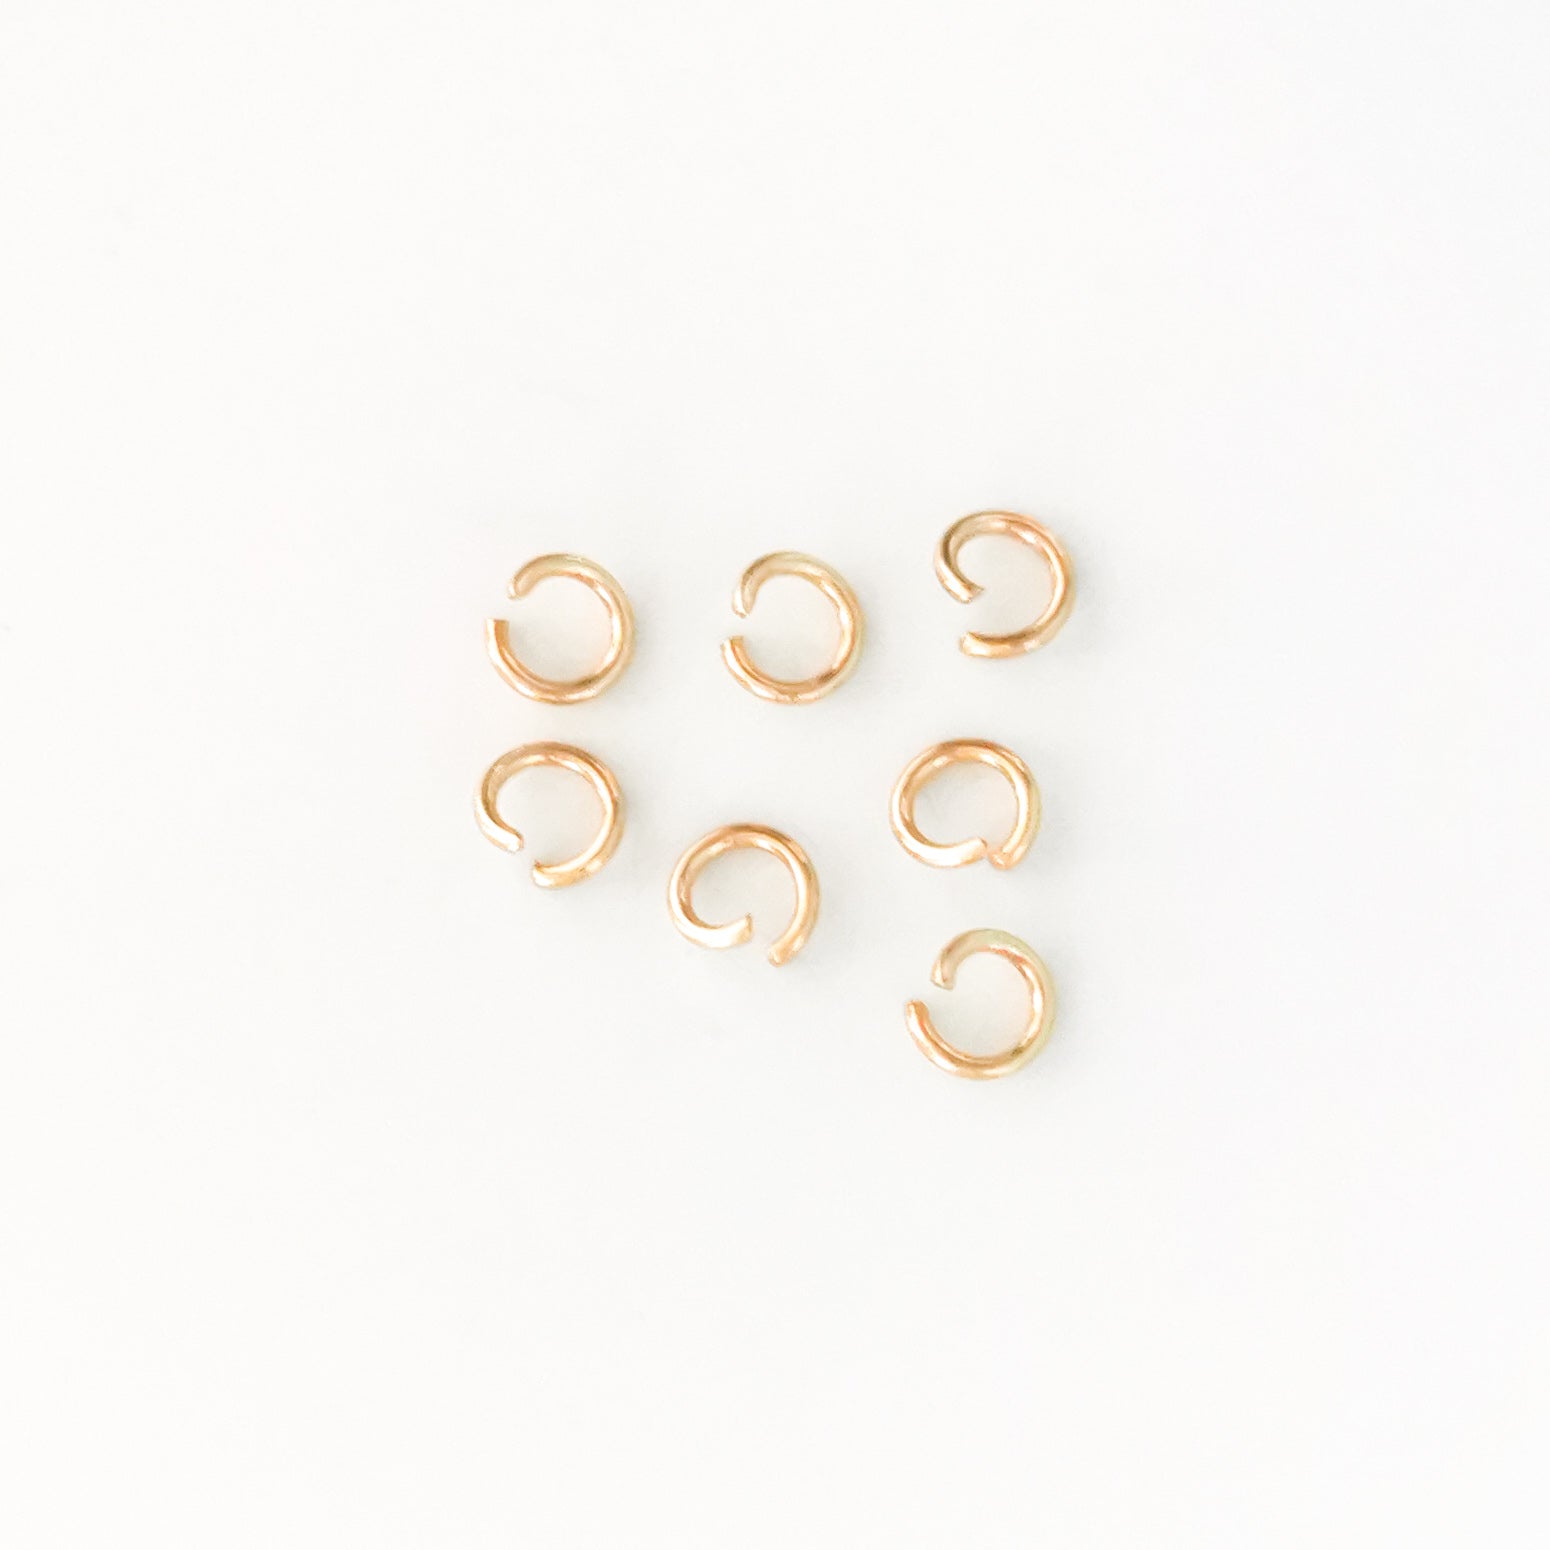 8mm Gold Stainless Steel Jump Rings - 100 pieces